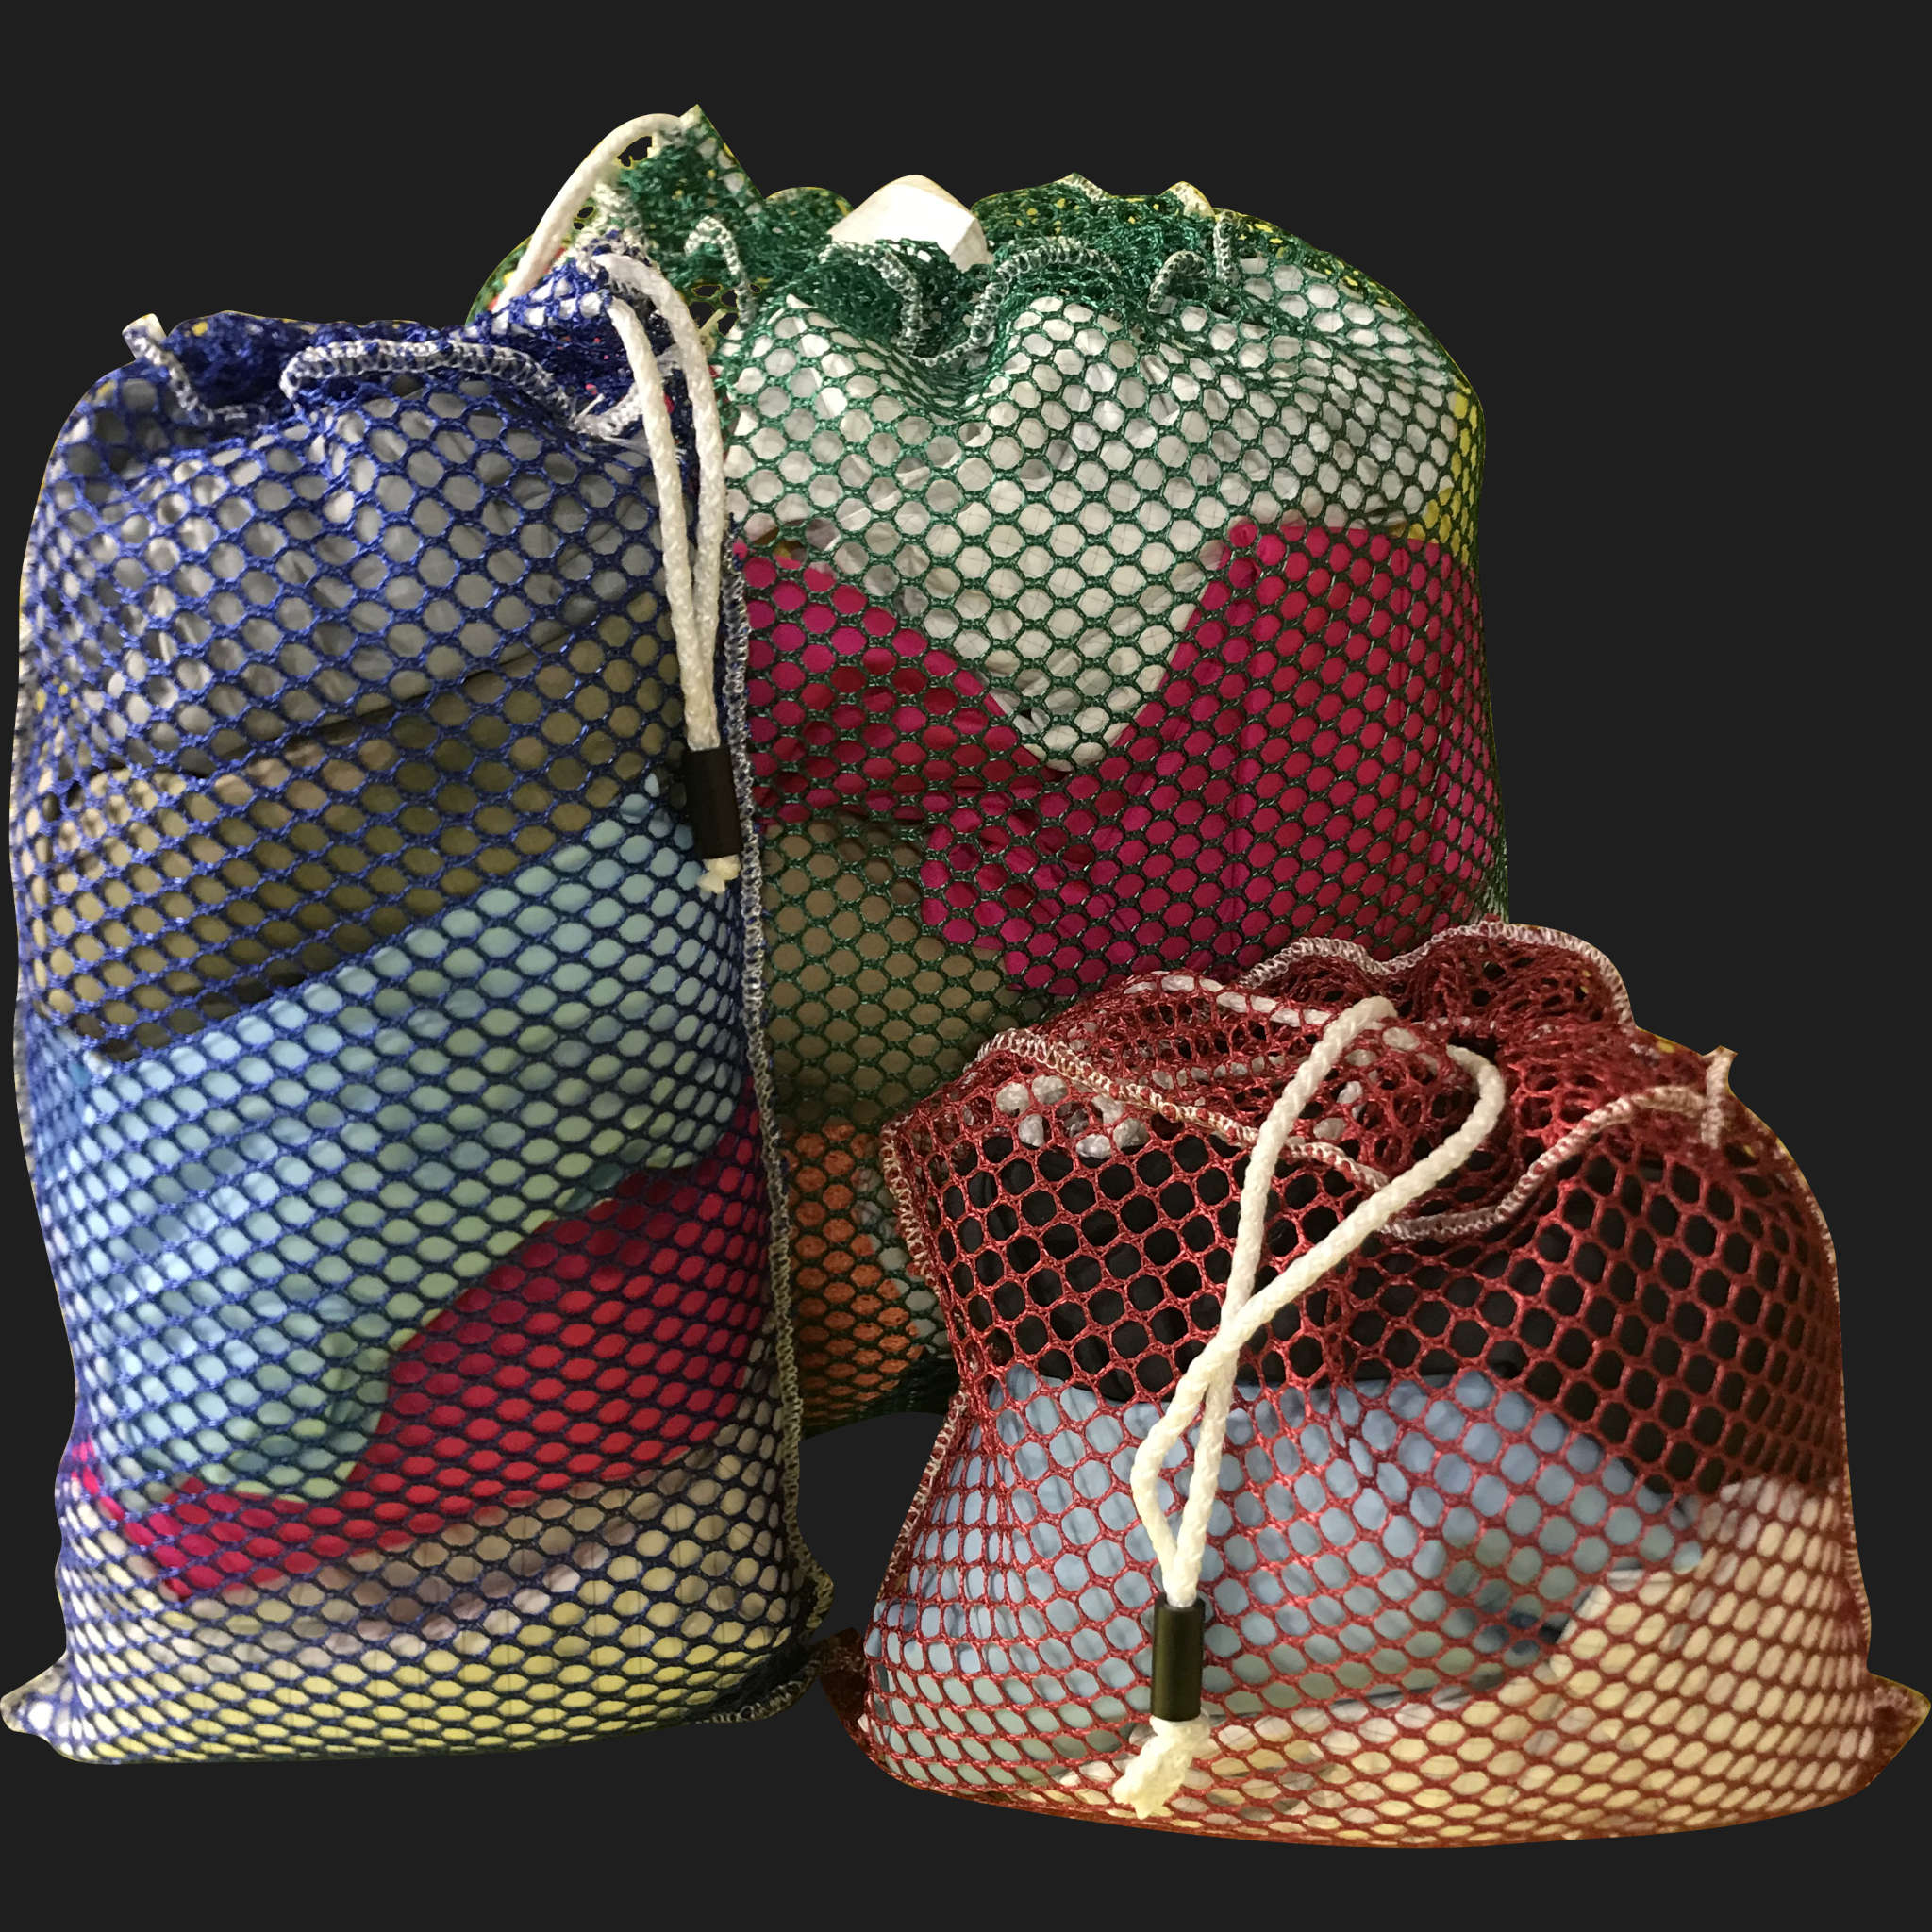 54" x 80" Customized Mesh-Net-Laundry Bags Heavy Duty with Cord and barrellock closure